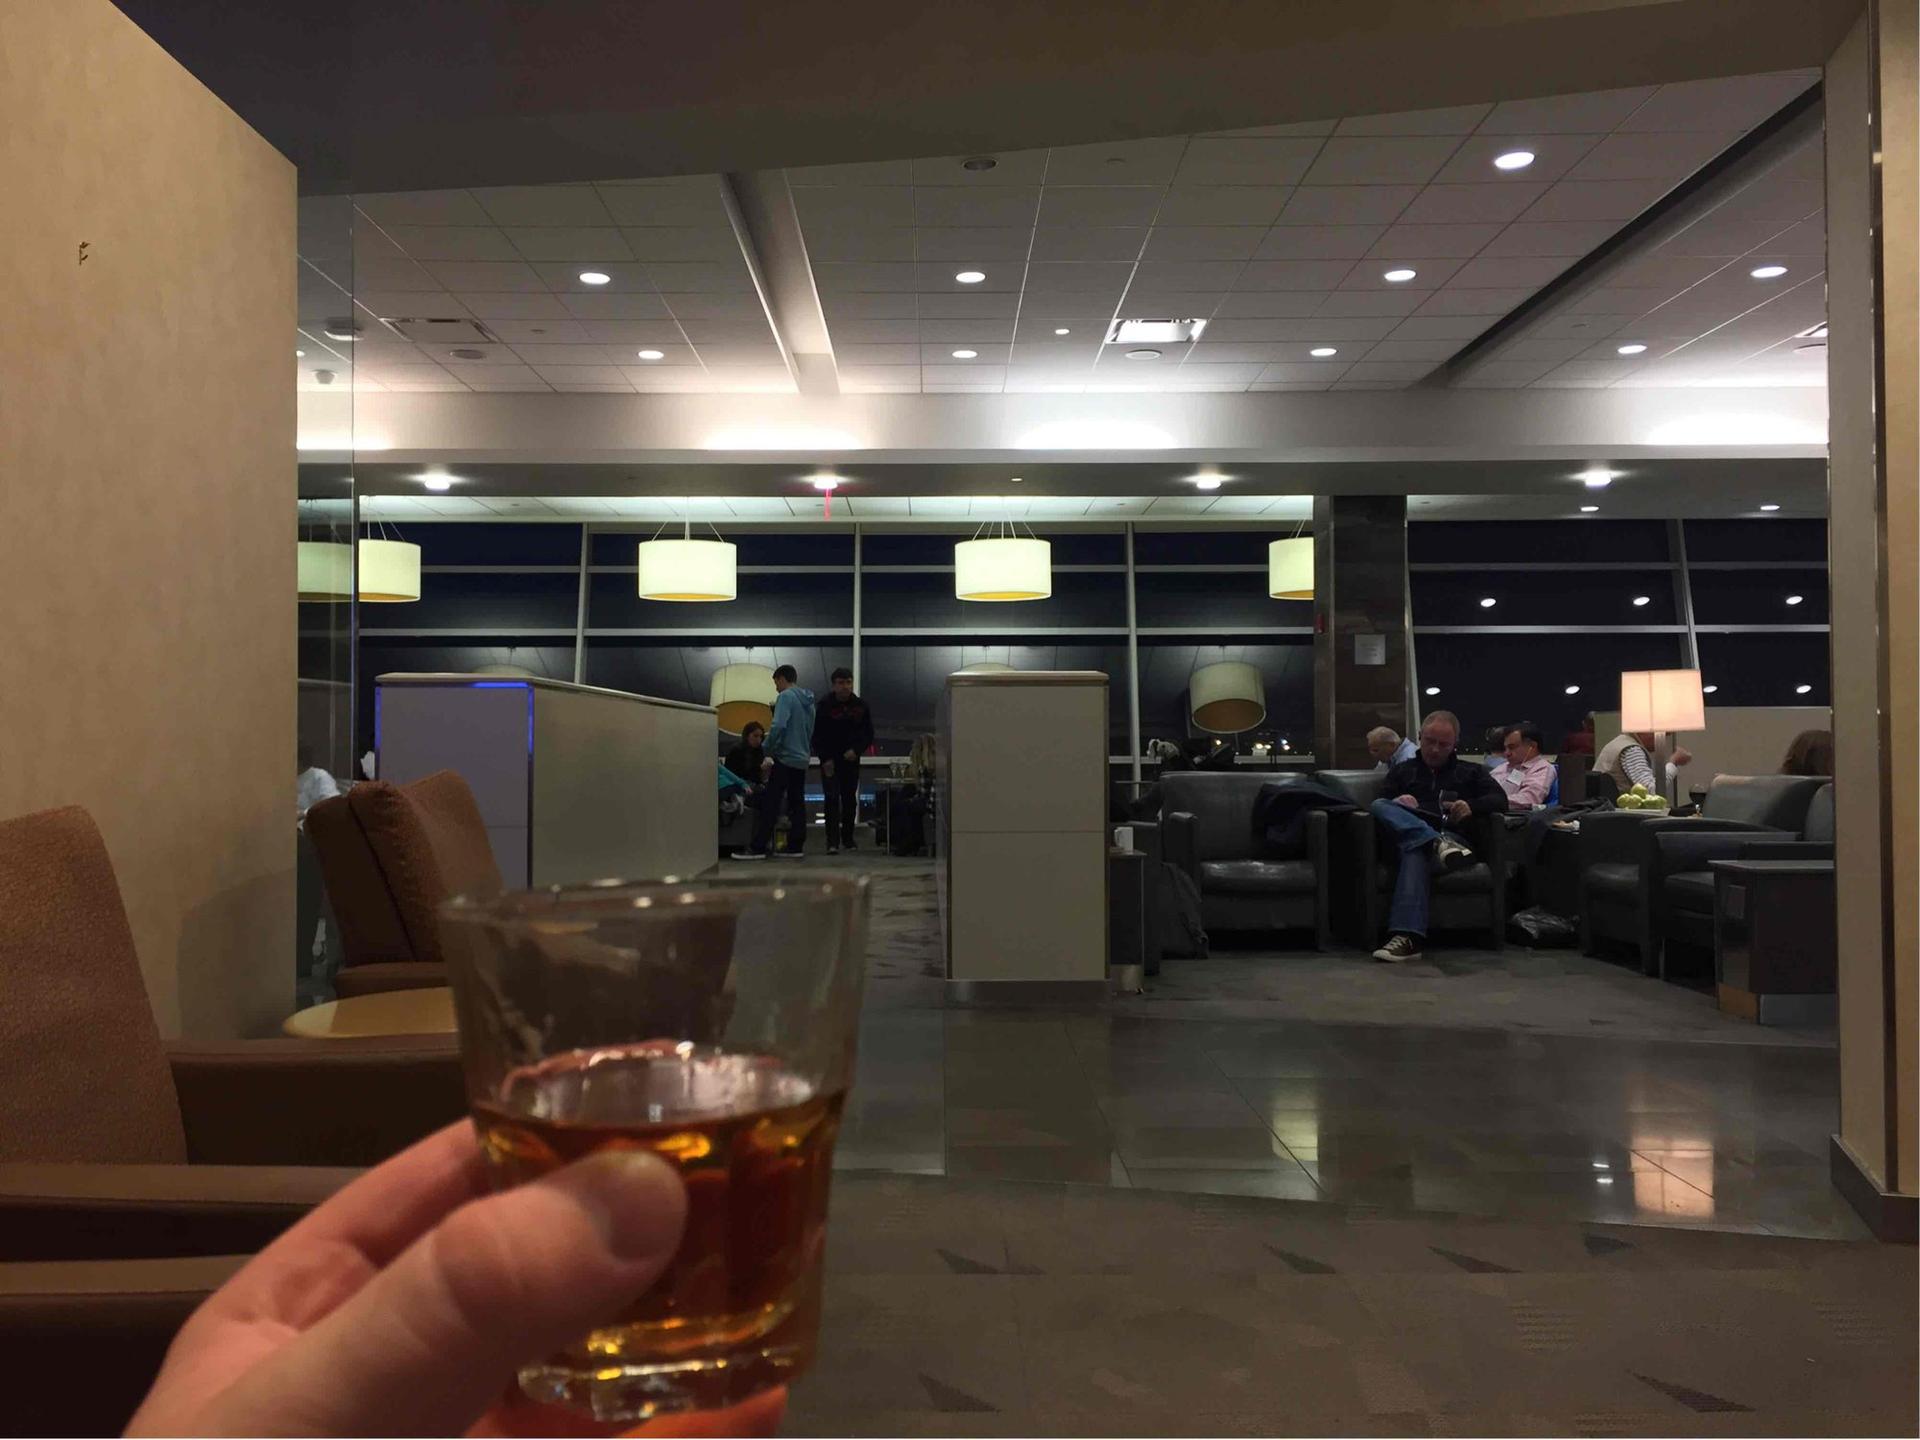 American Airlines Admirals Club image 13 of 25